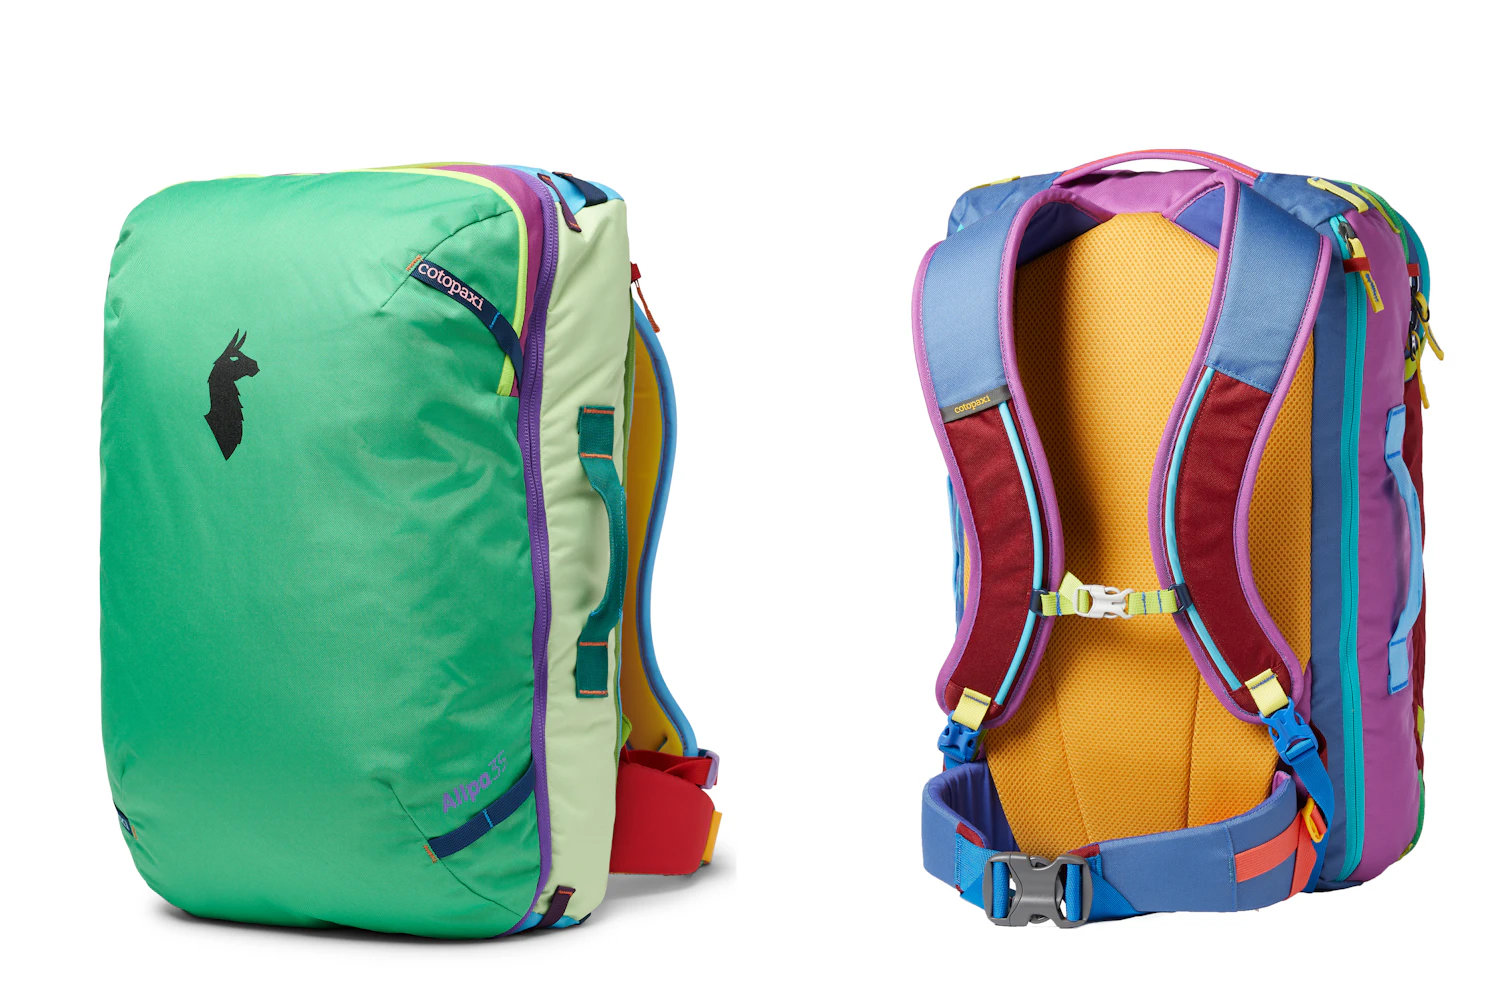 The photo shows the ALLPA 35L TRAVEL PACK - DEL DíA for 29,700 yen (tax included). The 28L ALLPA 28L TRAVEL PACK - DEL DíA is 26,400 yen (tax included), and the 42L ALLPA 42L TRAVEL PACK - DEL DíA is 33,000 yen (tax included).